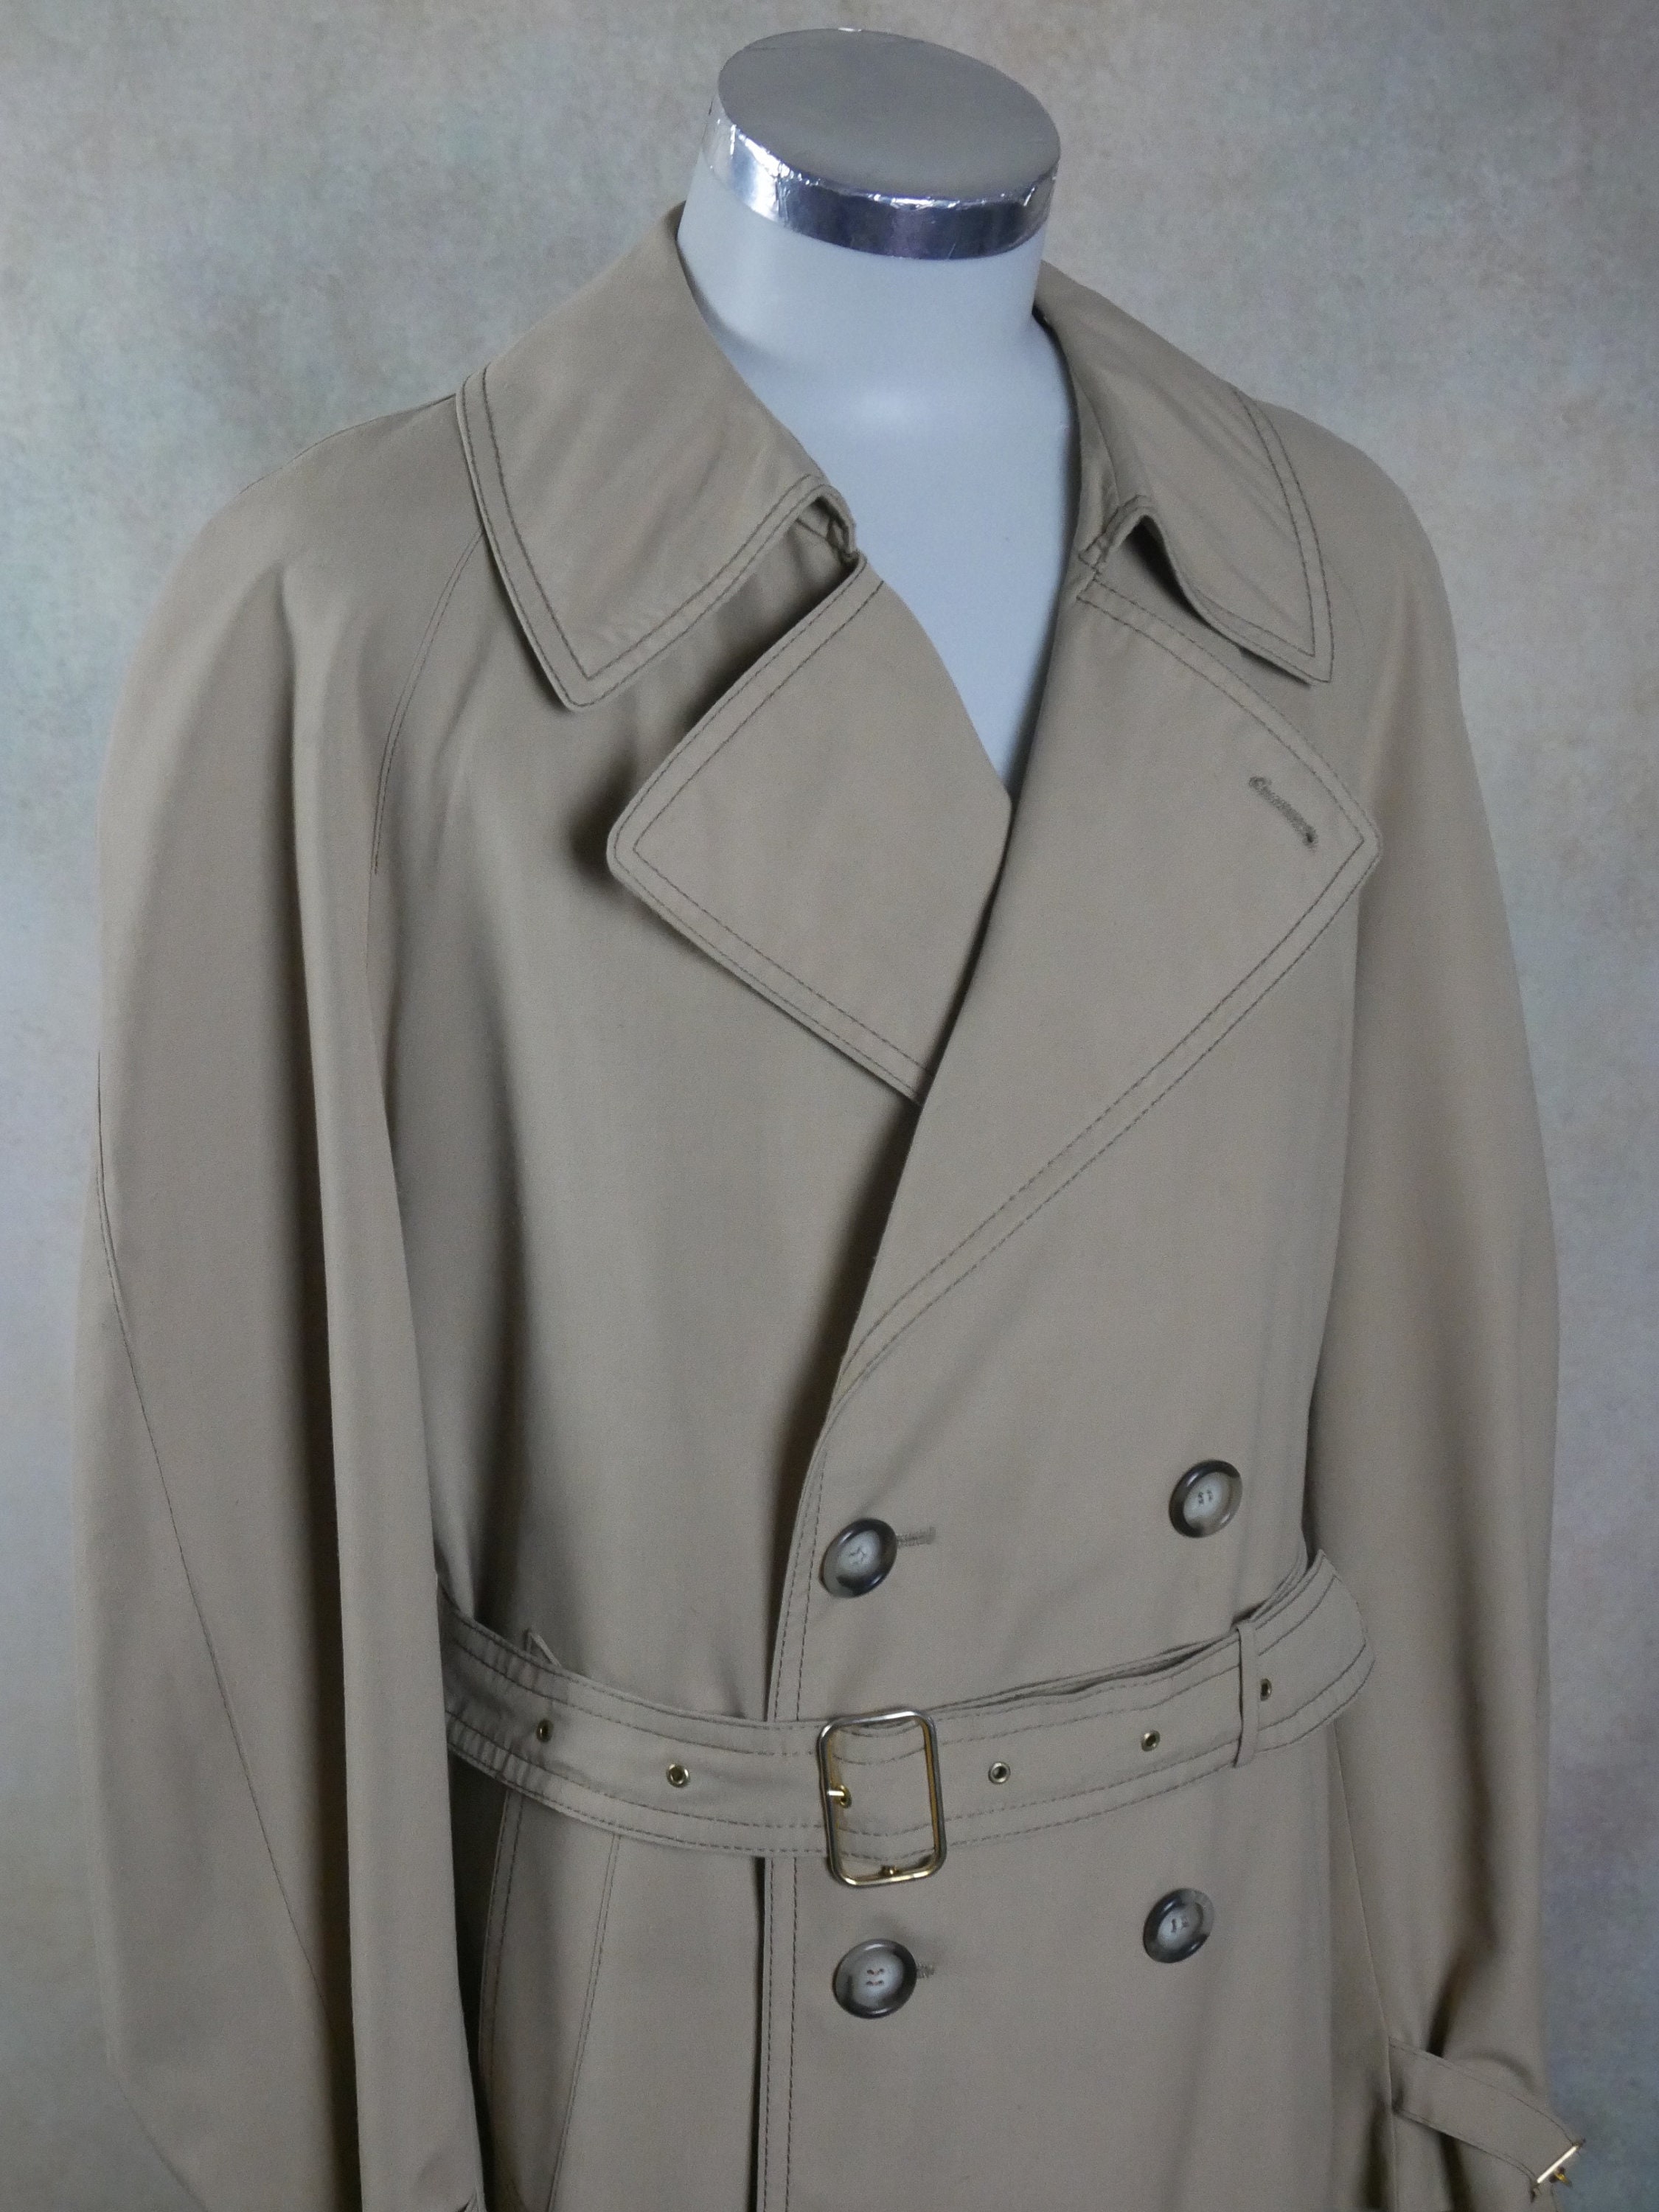 1970s Beige Trench Coat Swedish Vintage Double-Breasted | Etsy